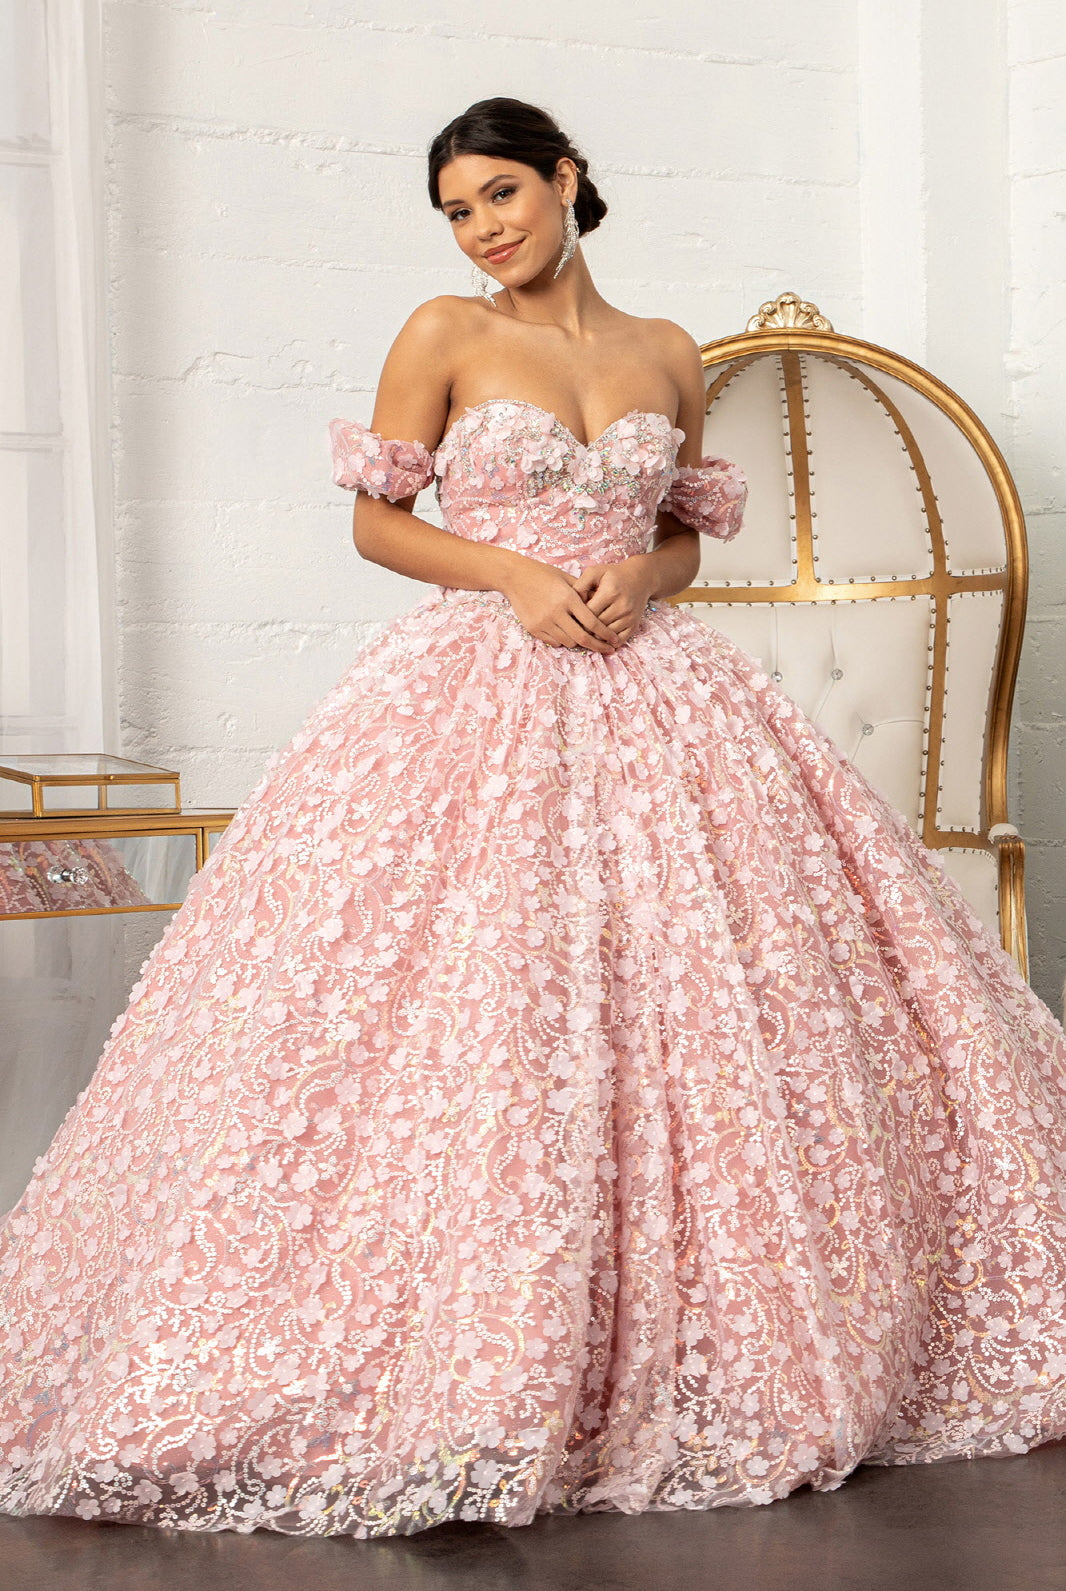 Jewel Embellished Mesh Quinceanera Ball Gown 3D Applique and Corset GLGL3019-QUINCEANERA-smcfashion.com